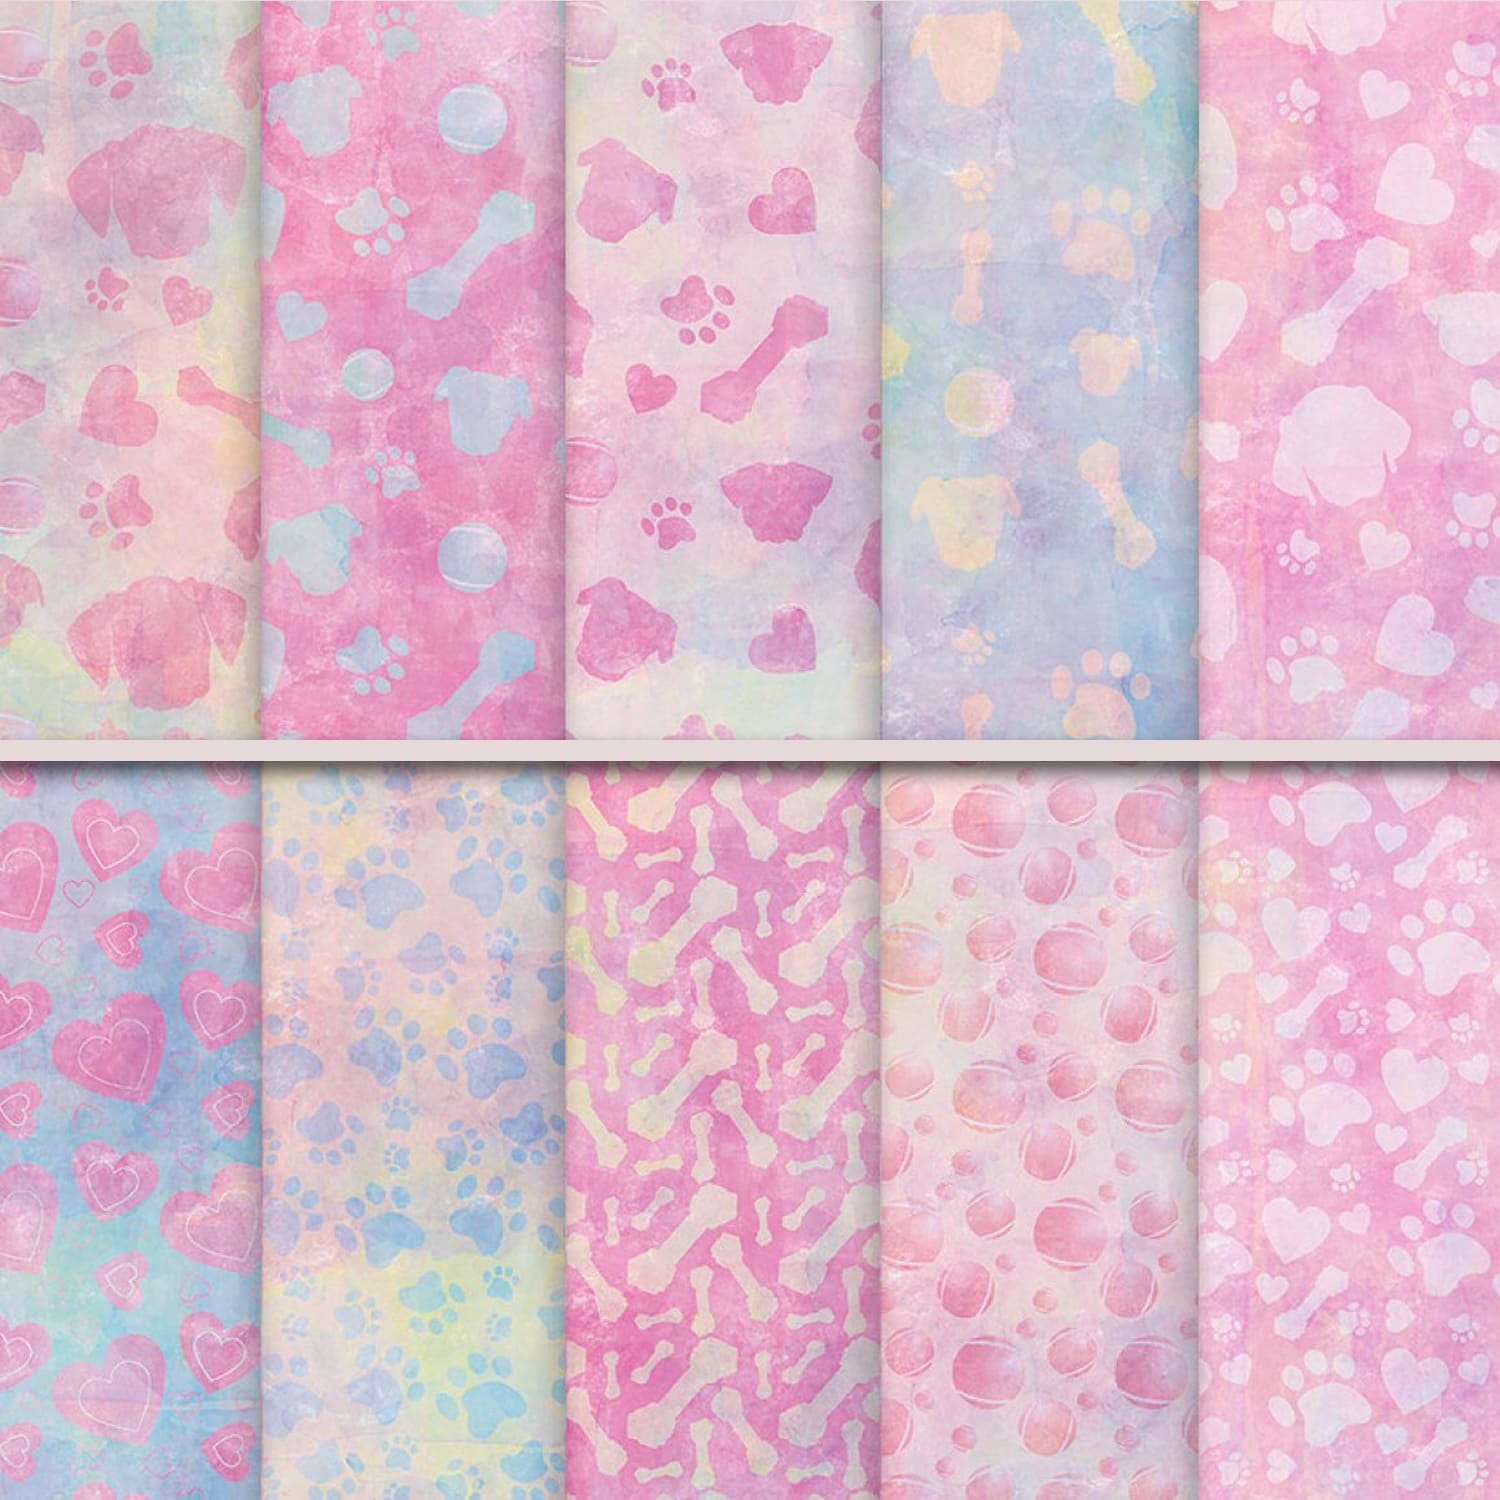 Pastel Watercolor Dog Patterns cover.